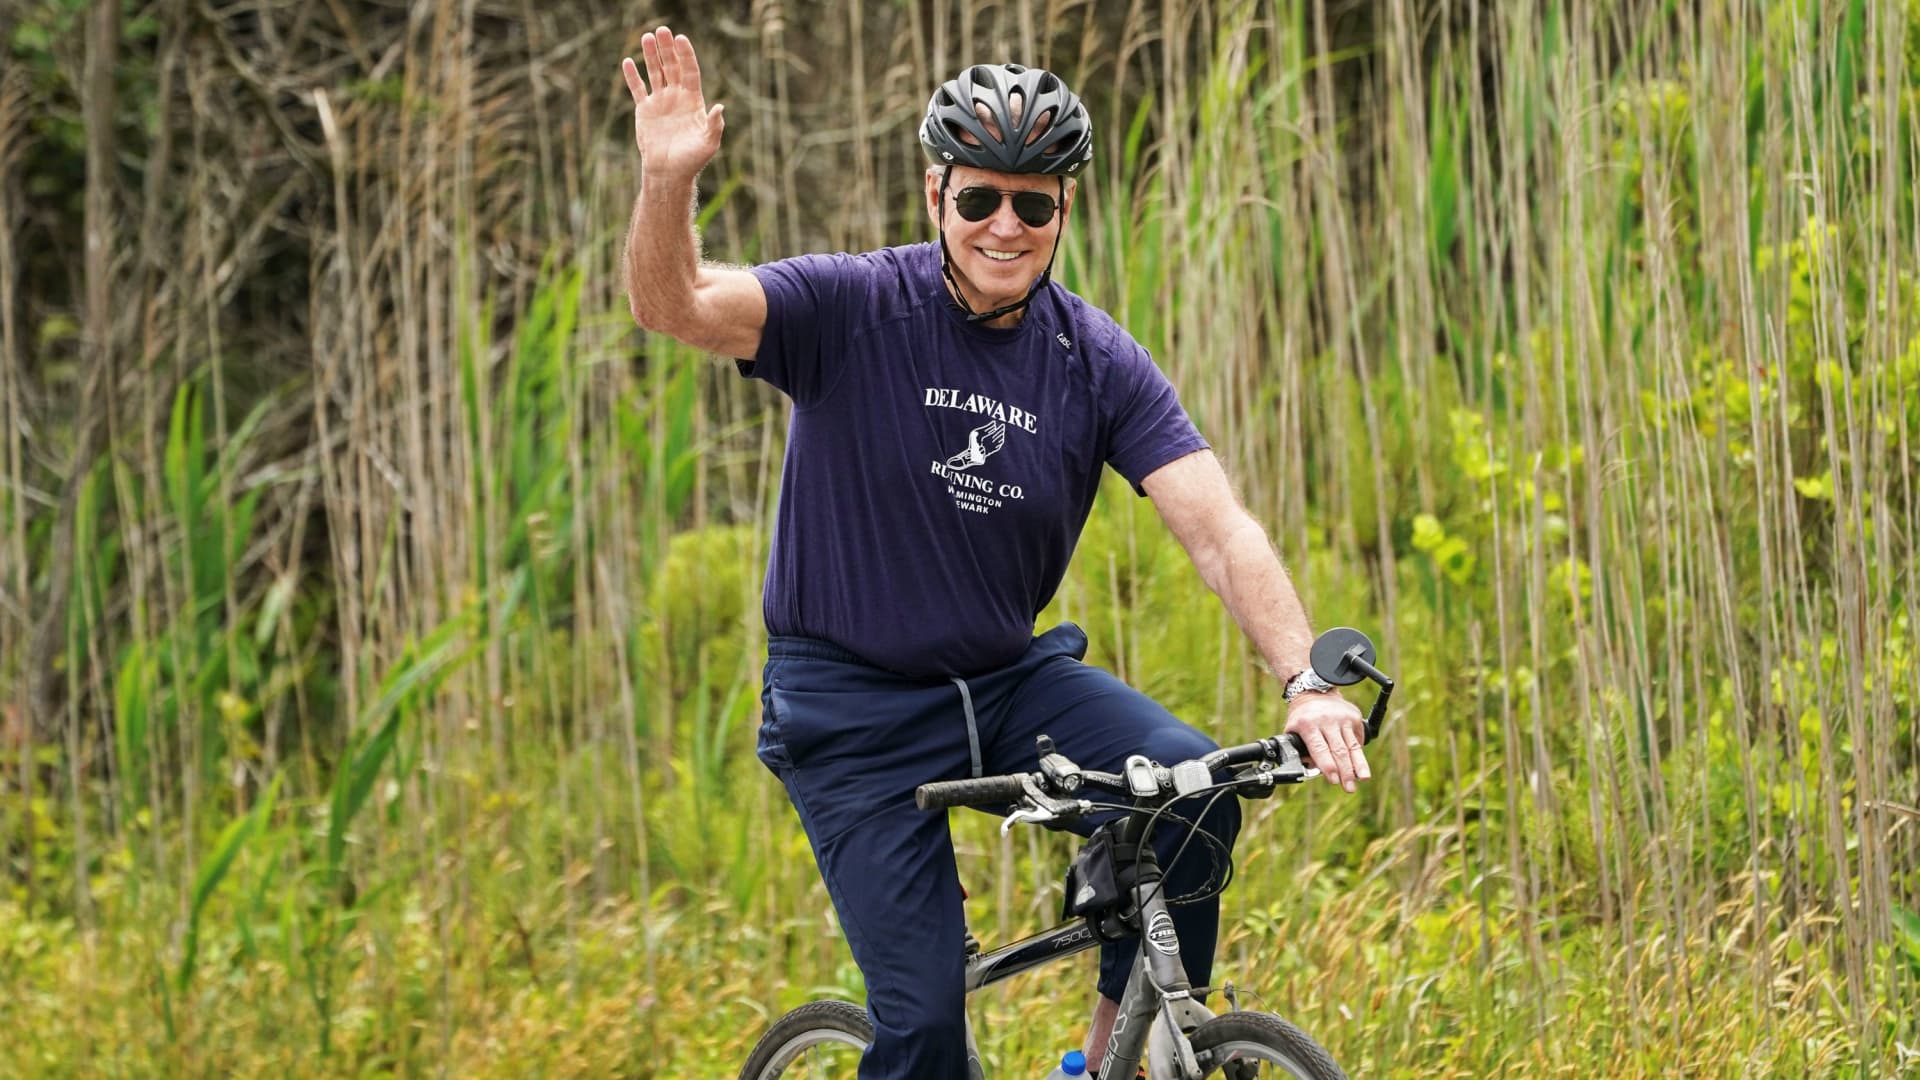 U.S. President Joe Biden waves from his bike while riding at Cape Henlopen State Park in Rehoboth Beach, Delaware, June 3, 2021.